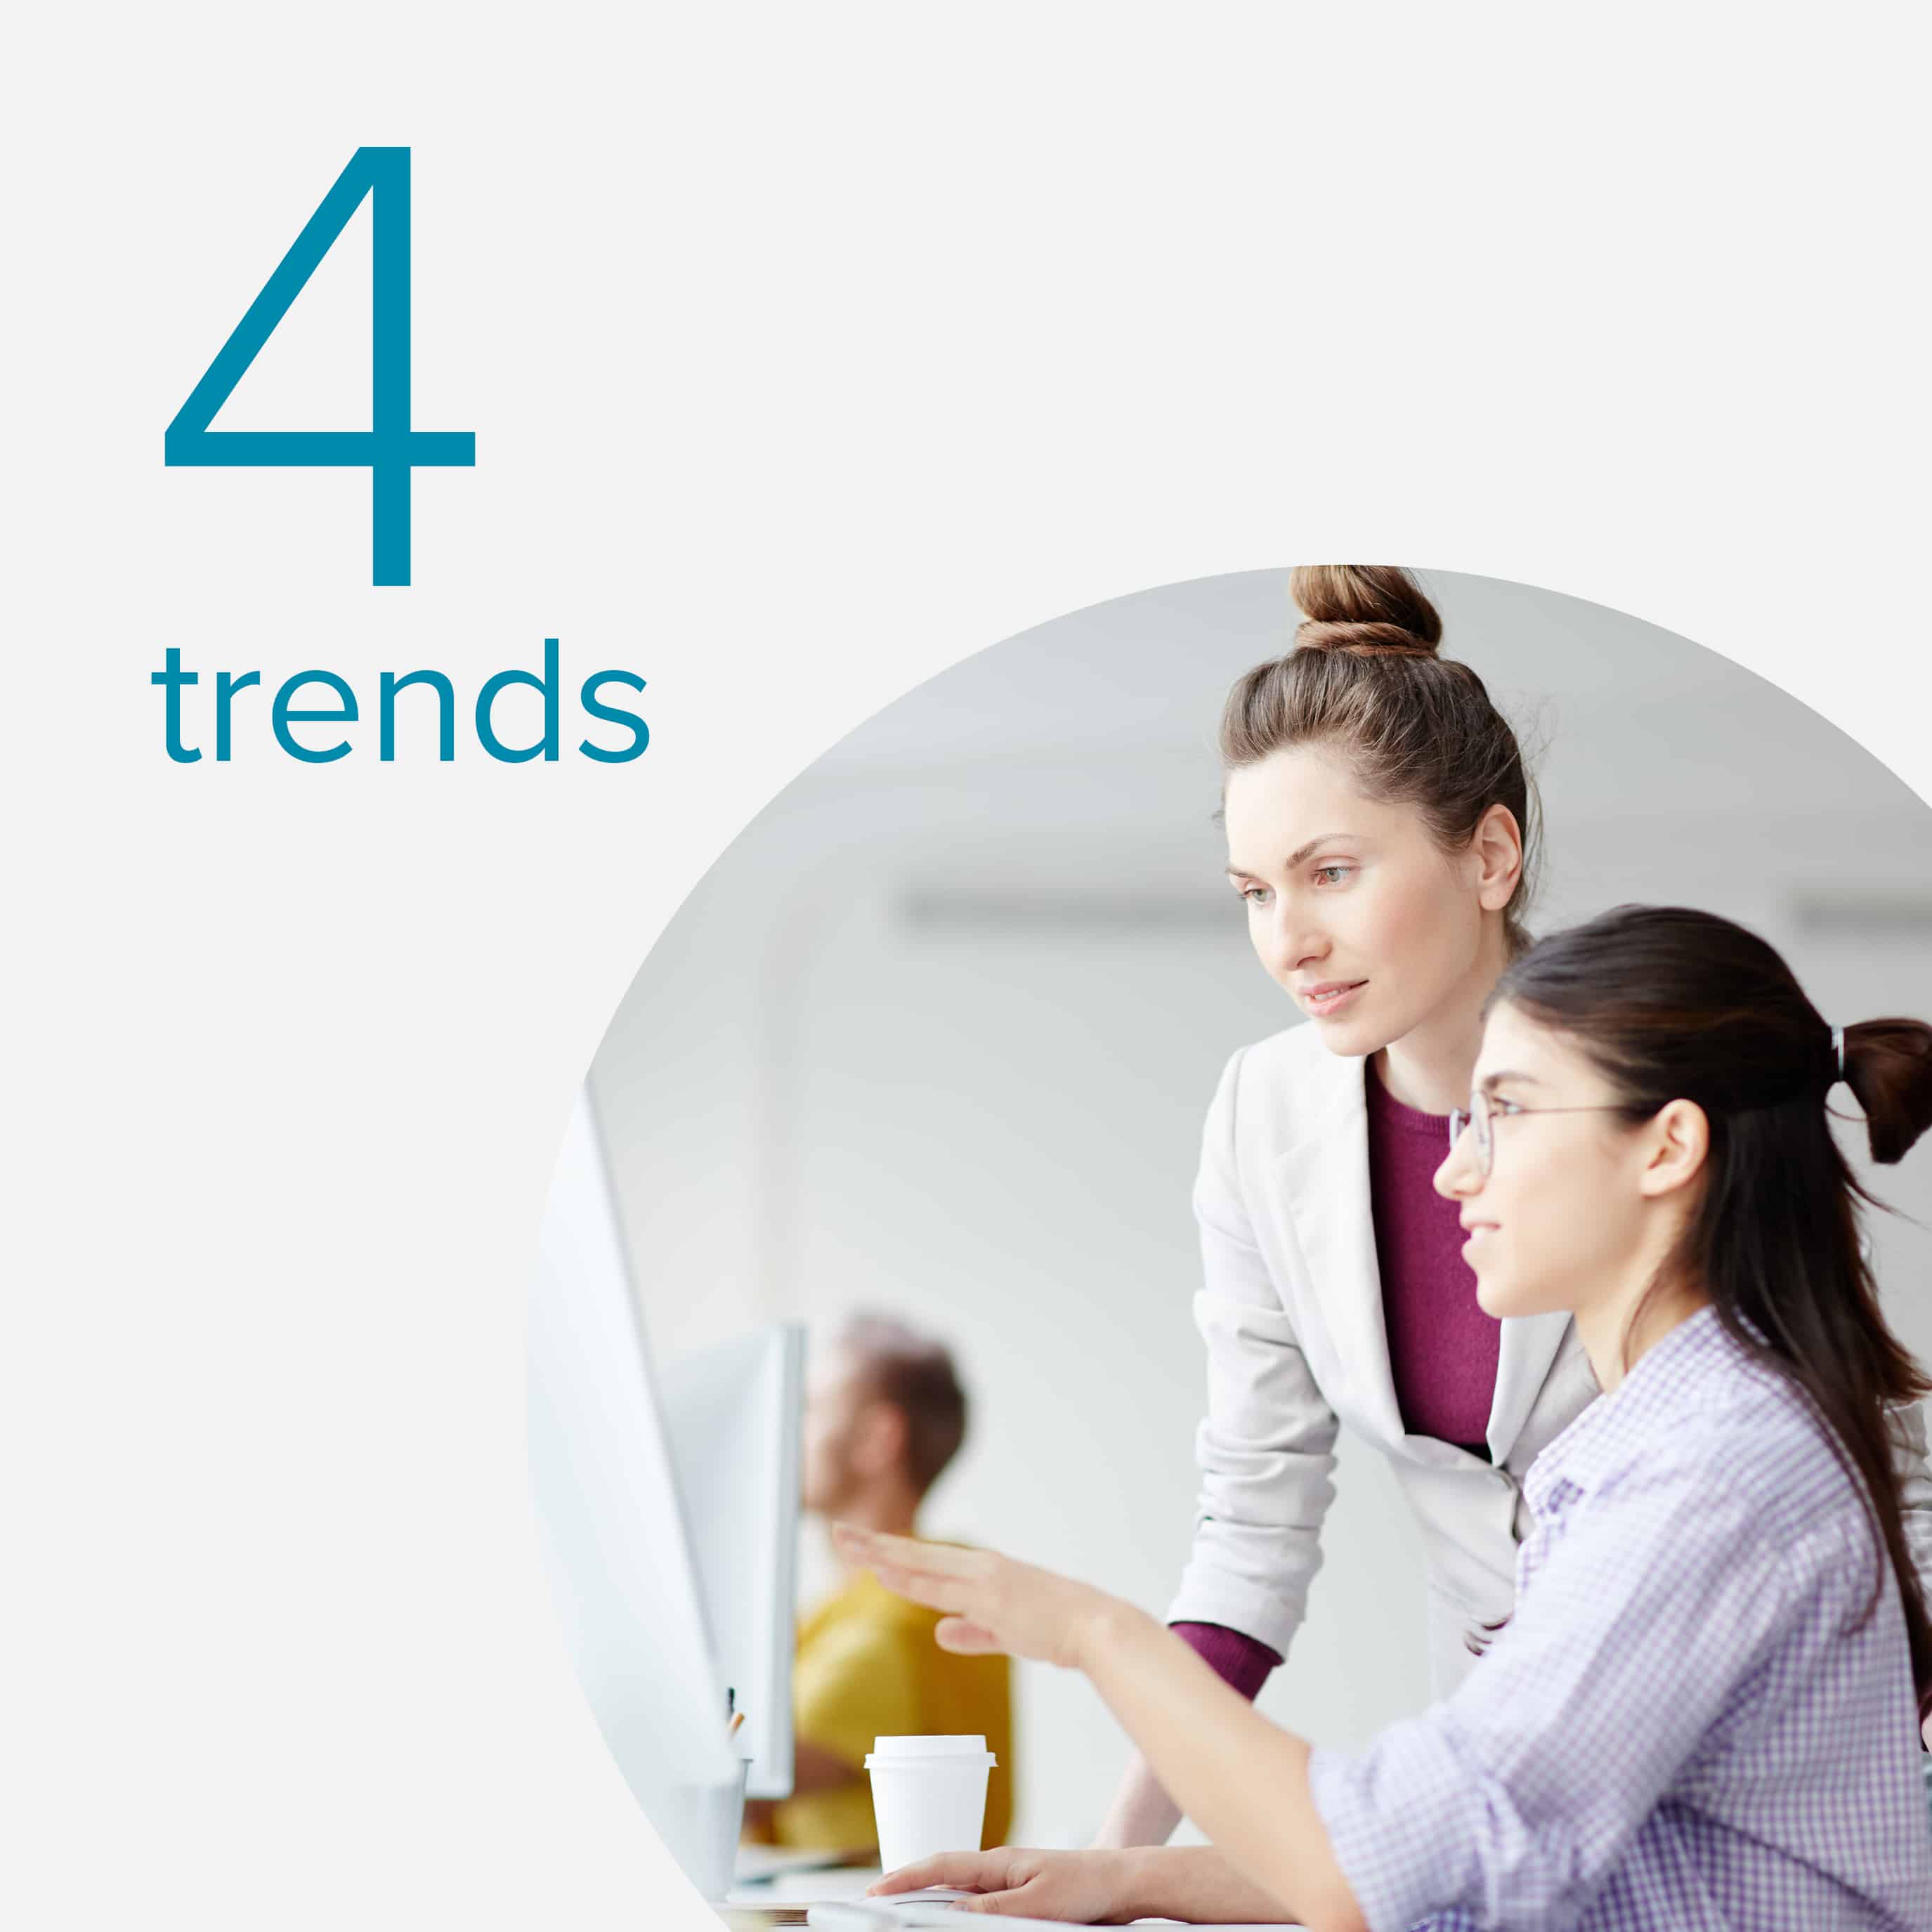 Four HR Trends to Watch in 2020